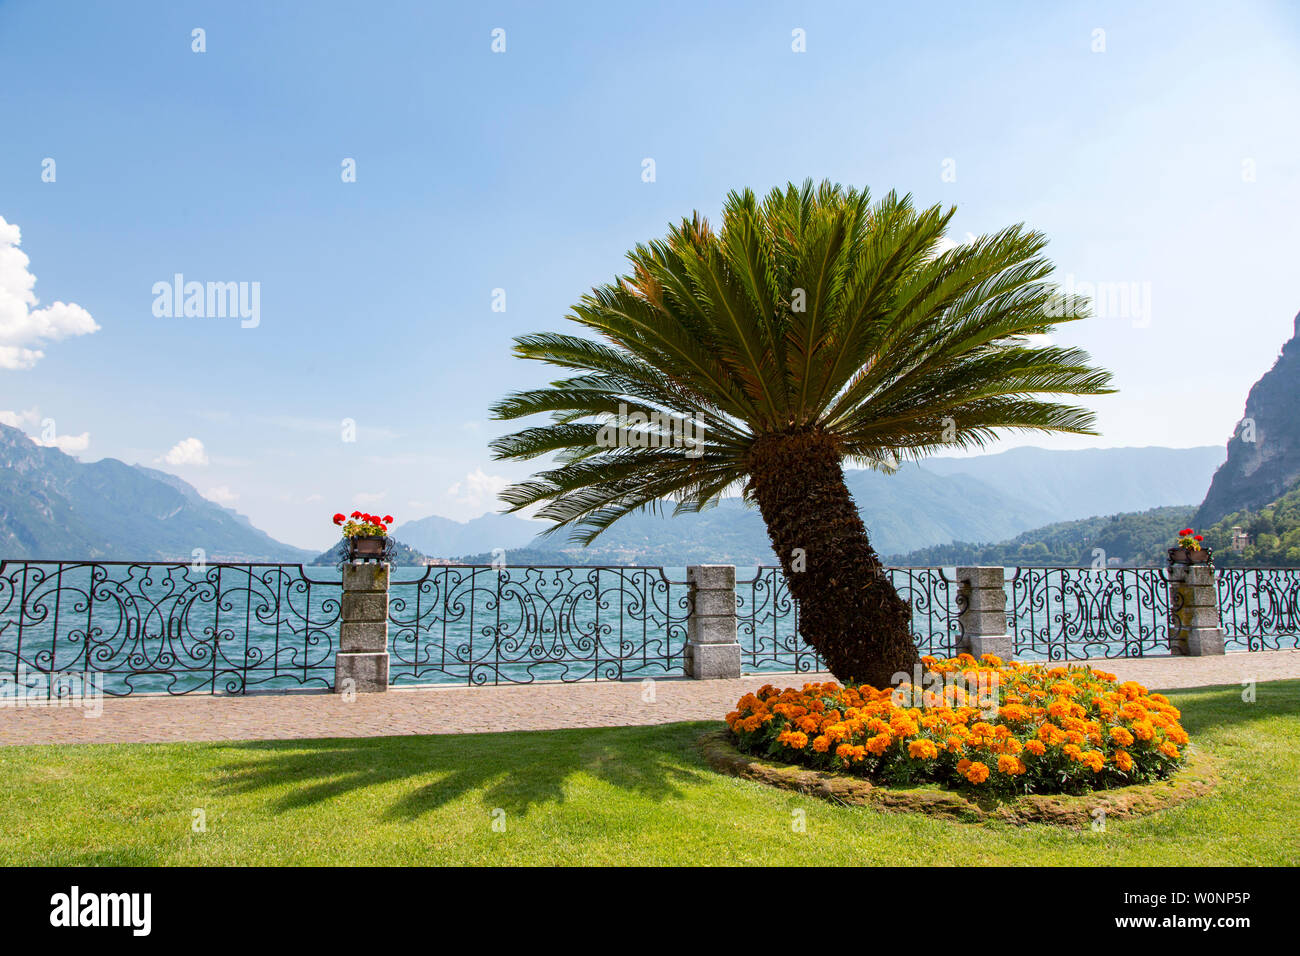 Promenade with orange flowers in park and palm trees on the shore, Lake Como, Menaggio, Lombardy region, Northern Italy, Europe Stock Photo